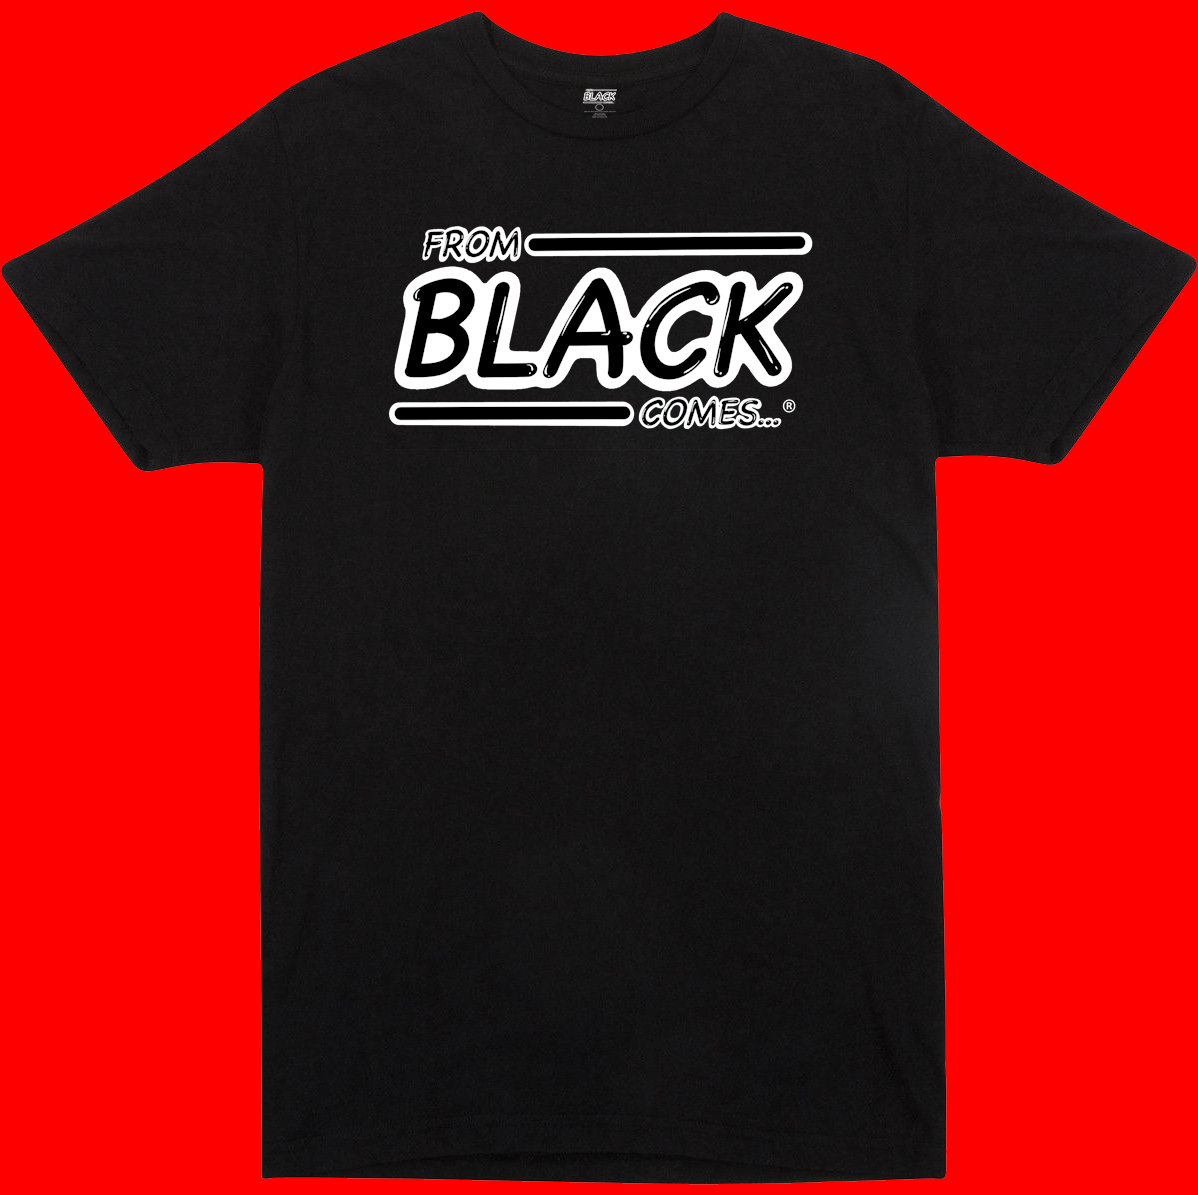 From Black Comes® Black & White Logo Youth T-Shirt